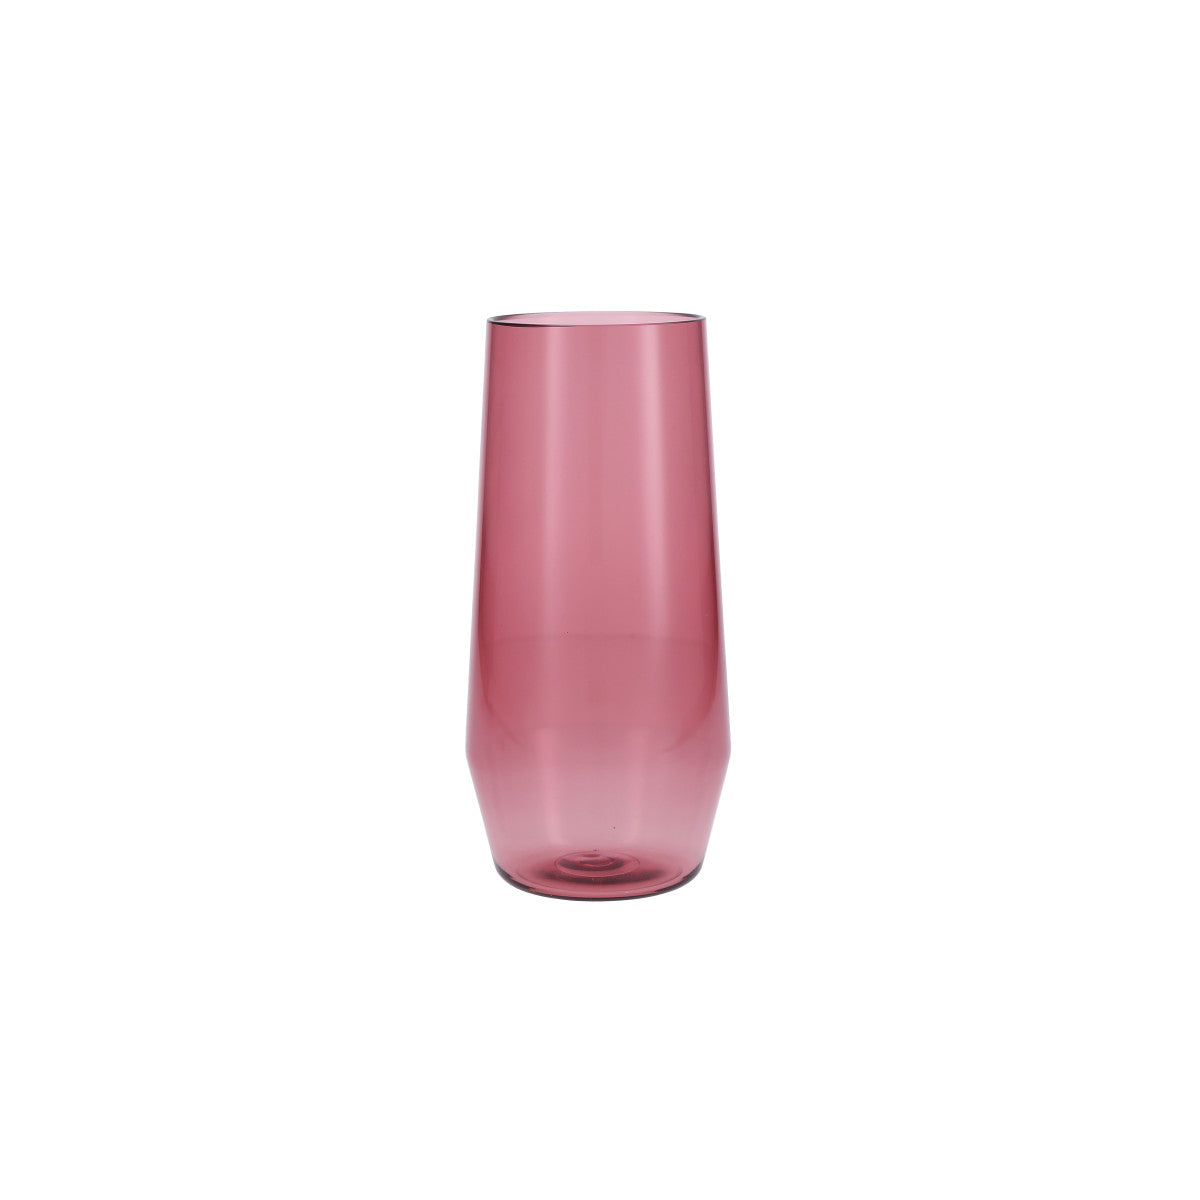 tall narrow rose colored drinking glass on white background.